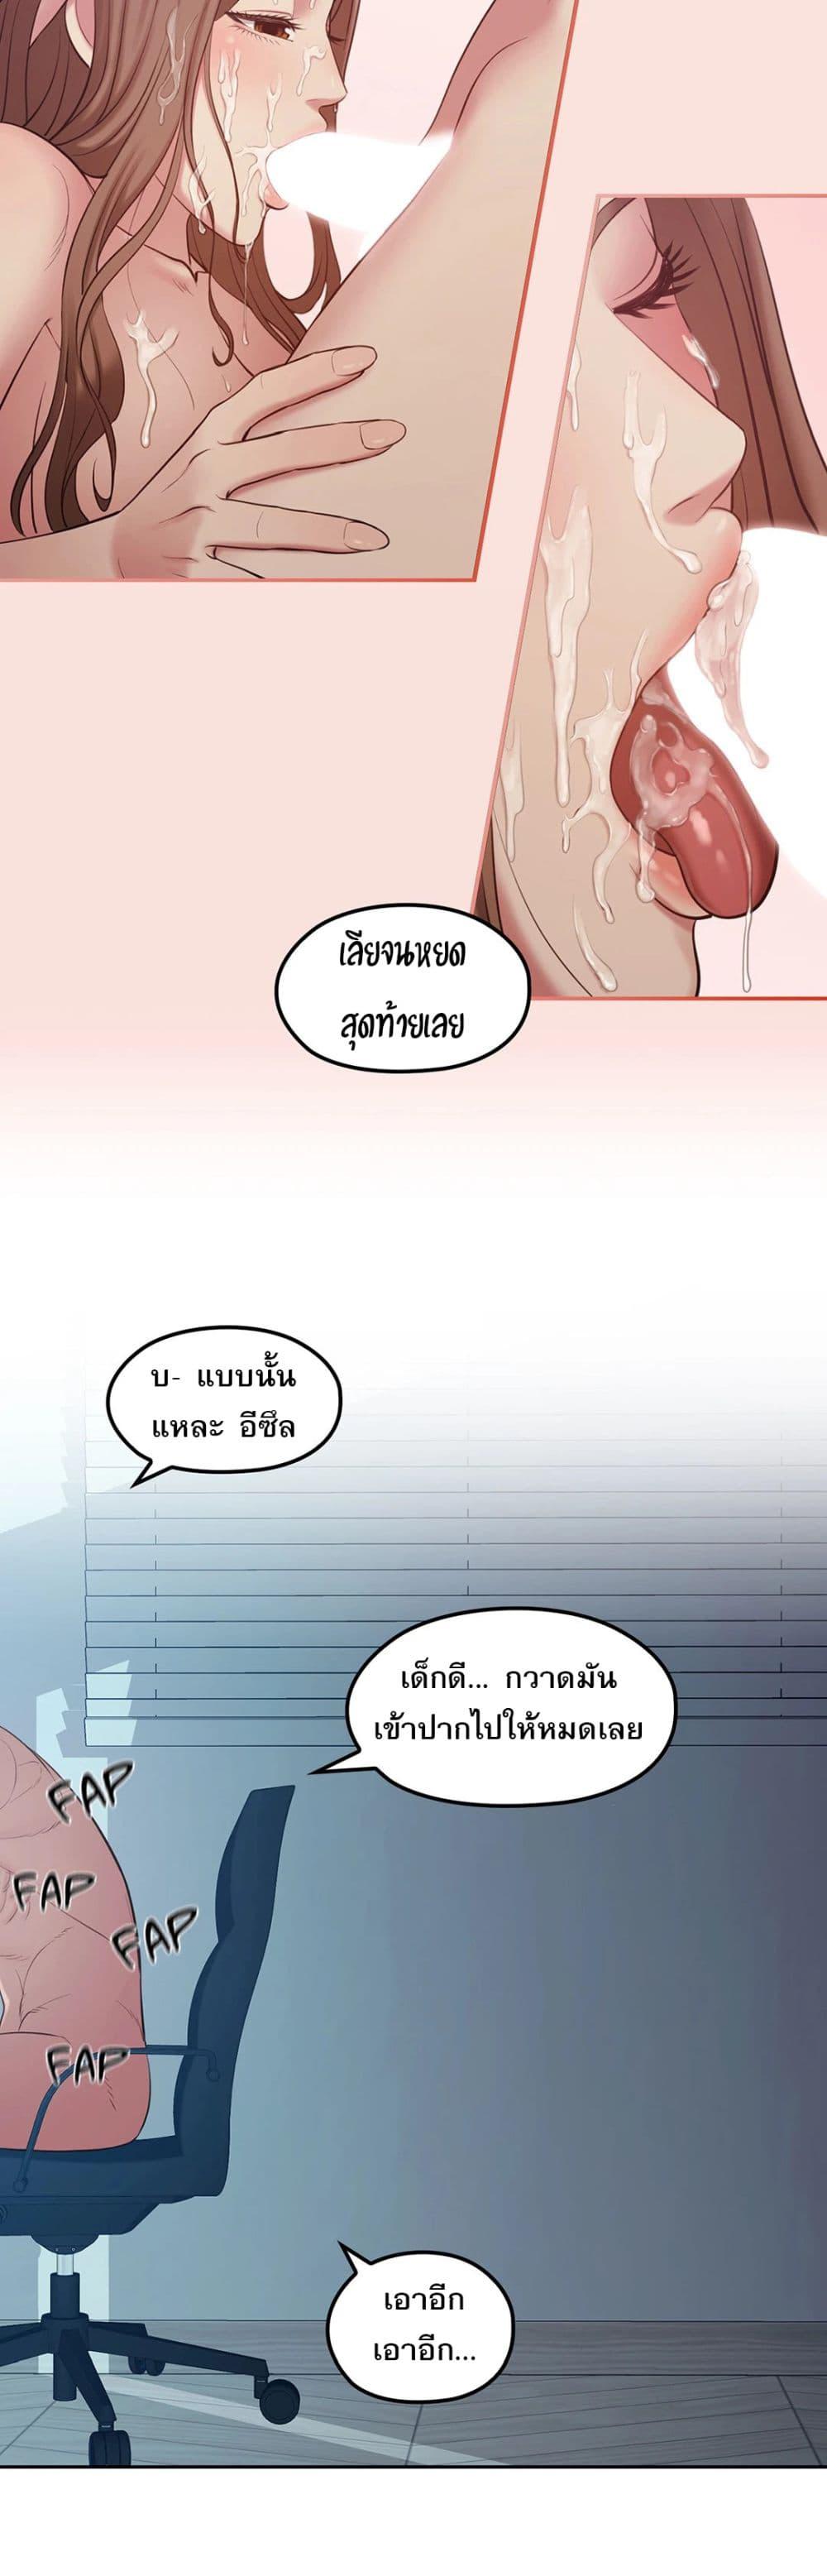 Sexual Consulting 1 ภาพ 66